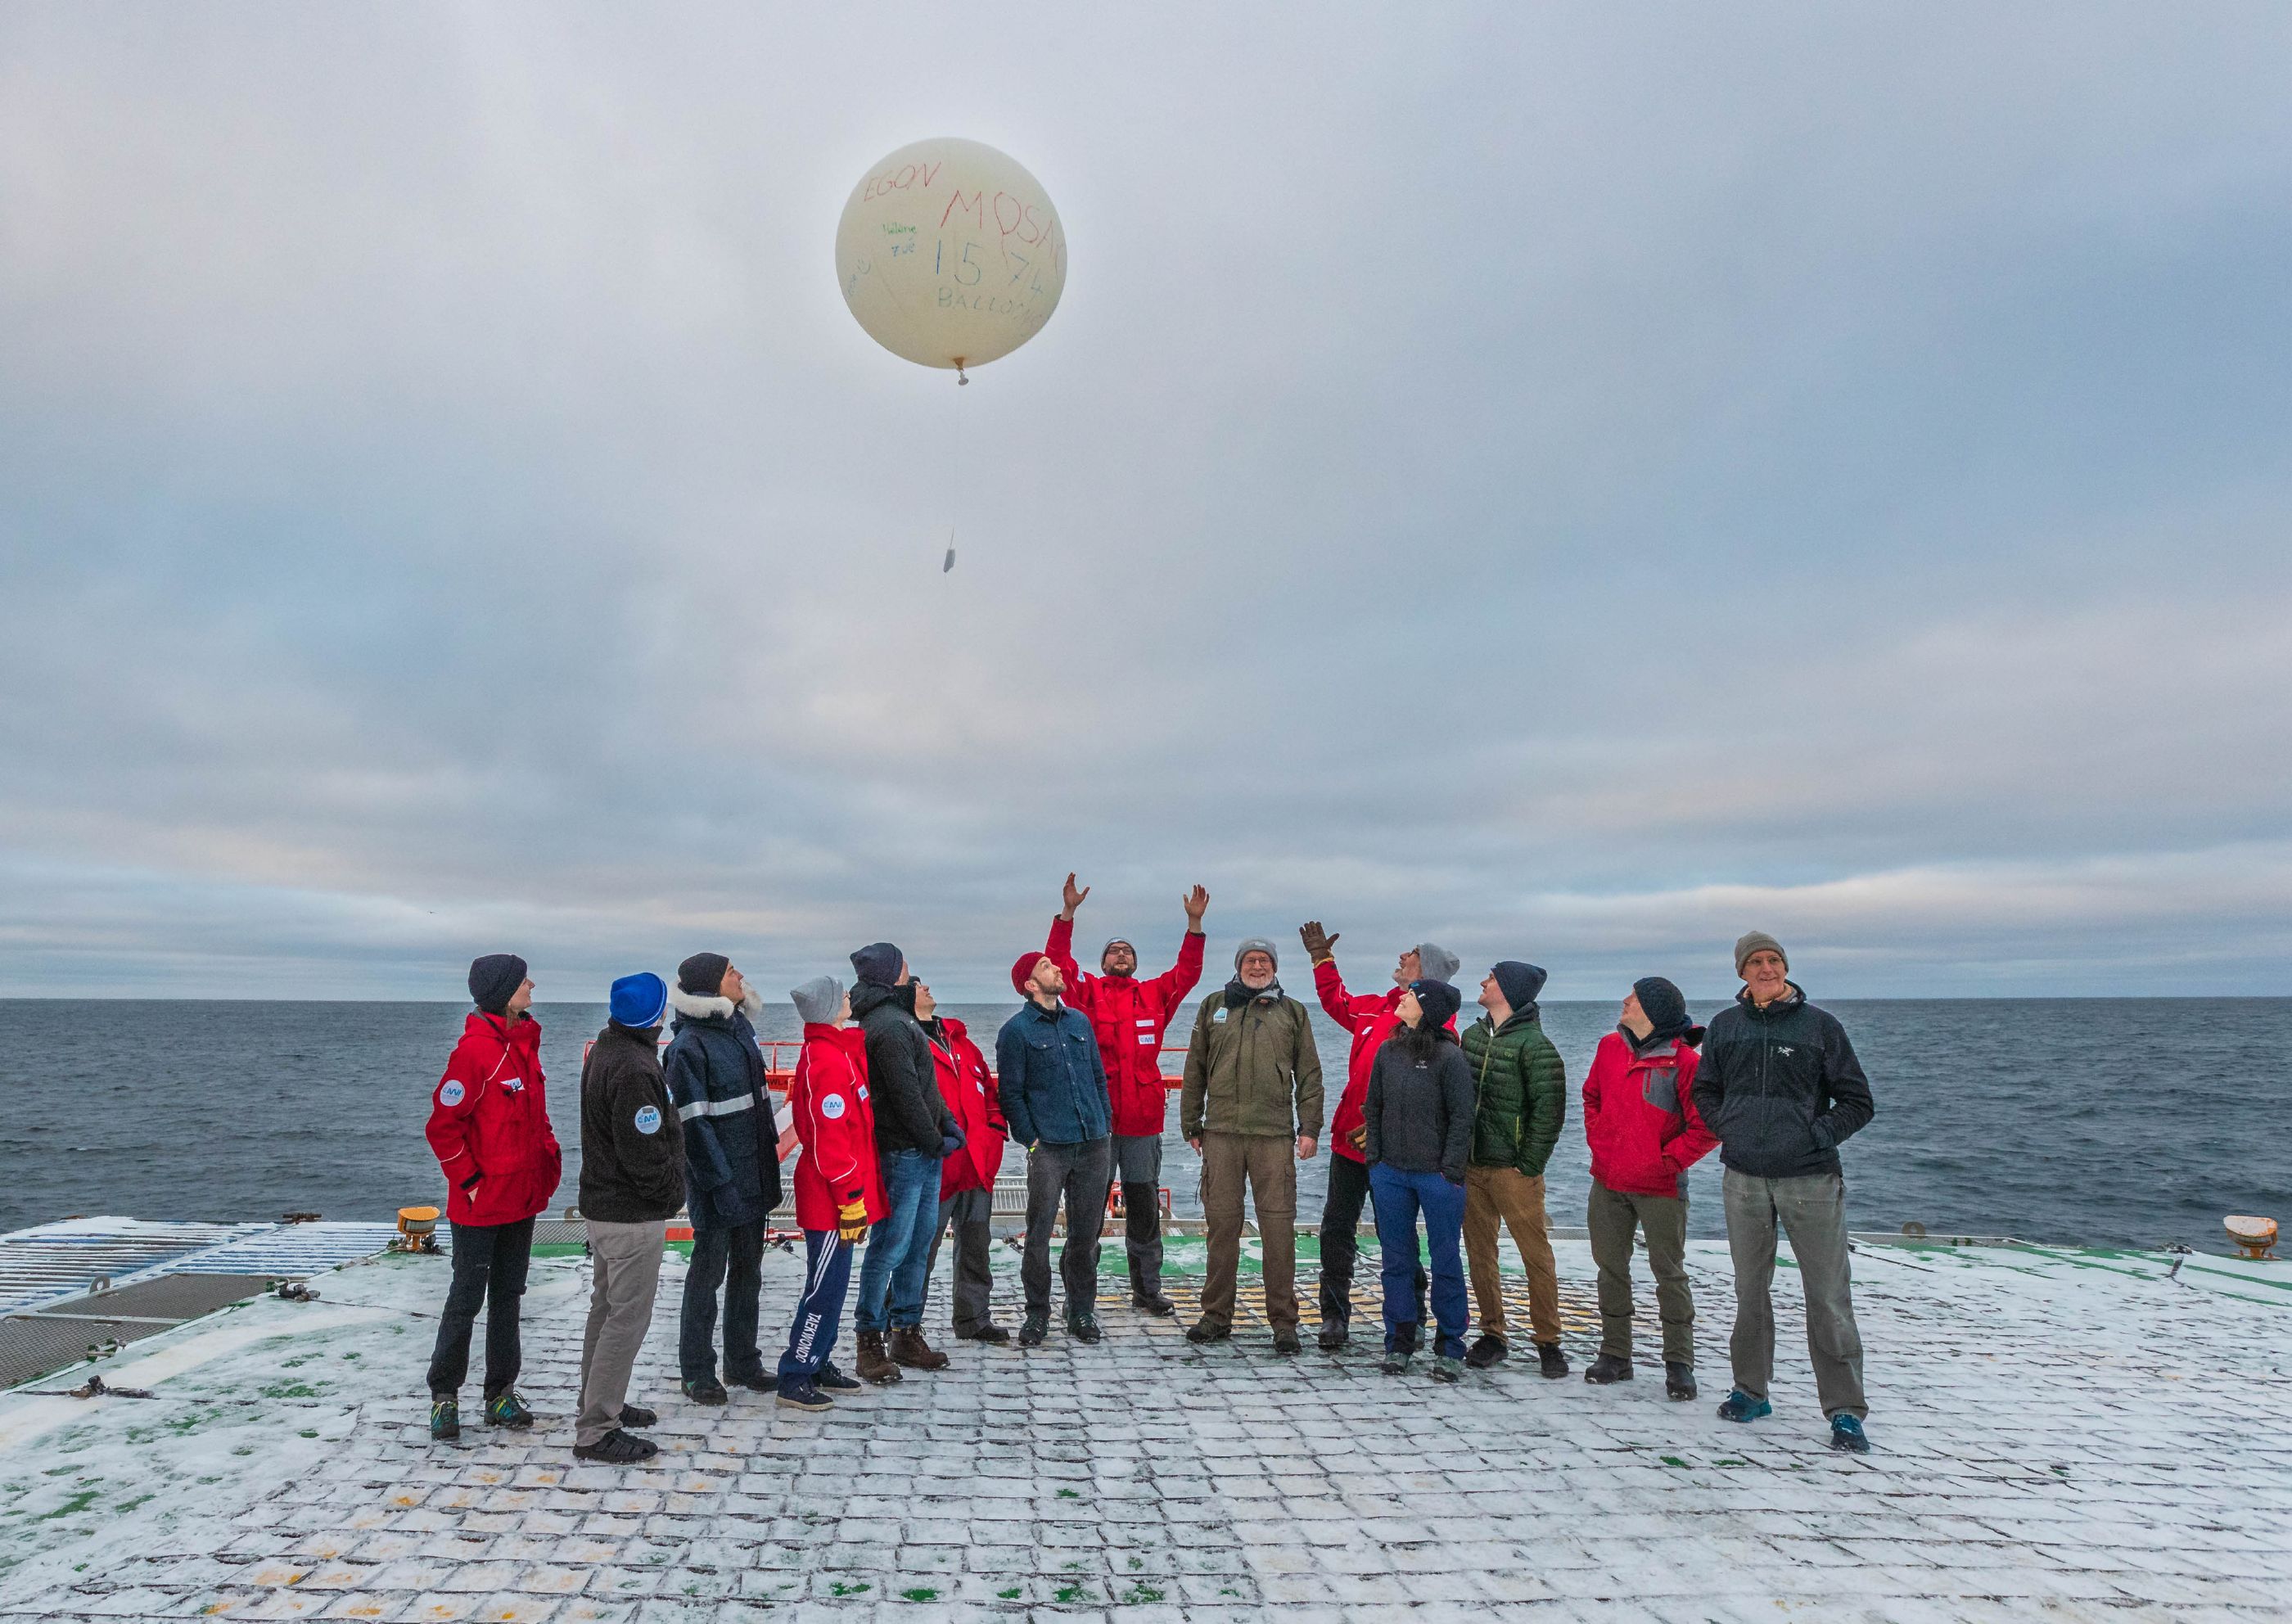 Atmosphere team releases its last weather balloon of MOSAiC